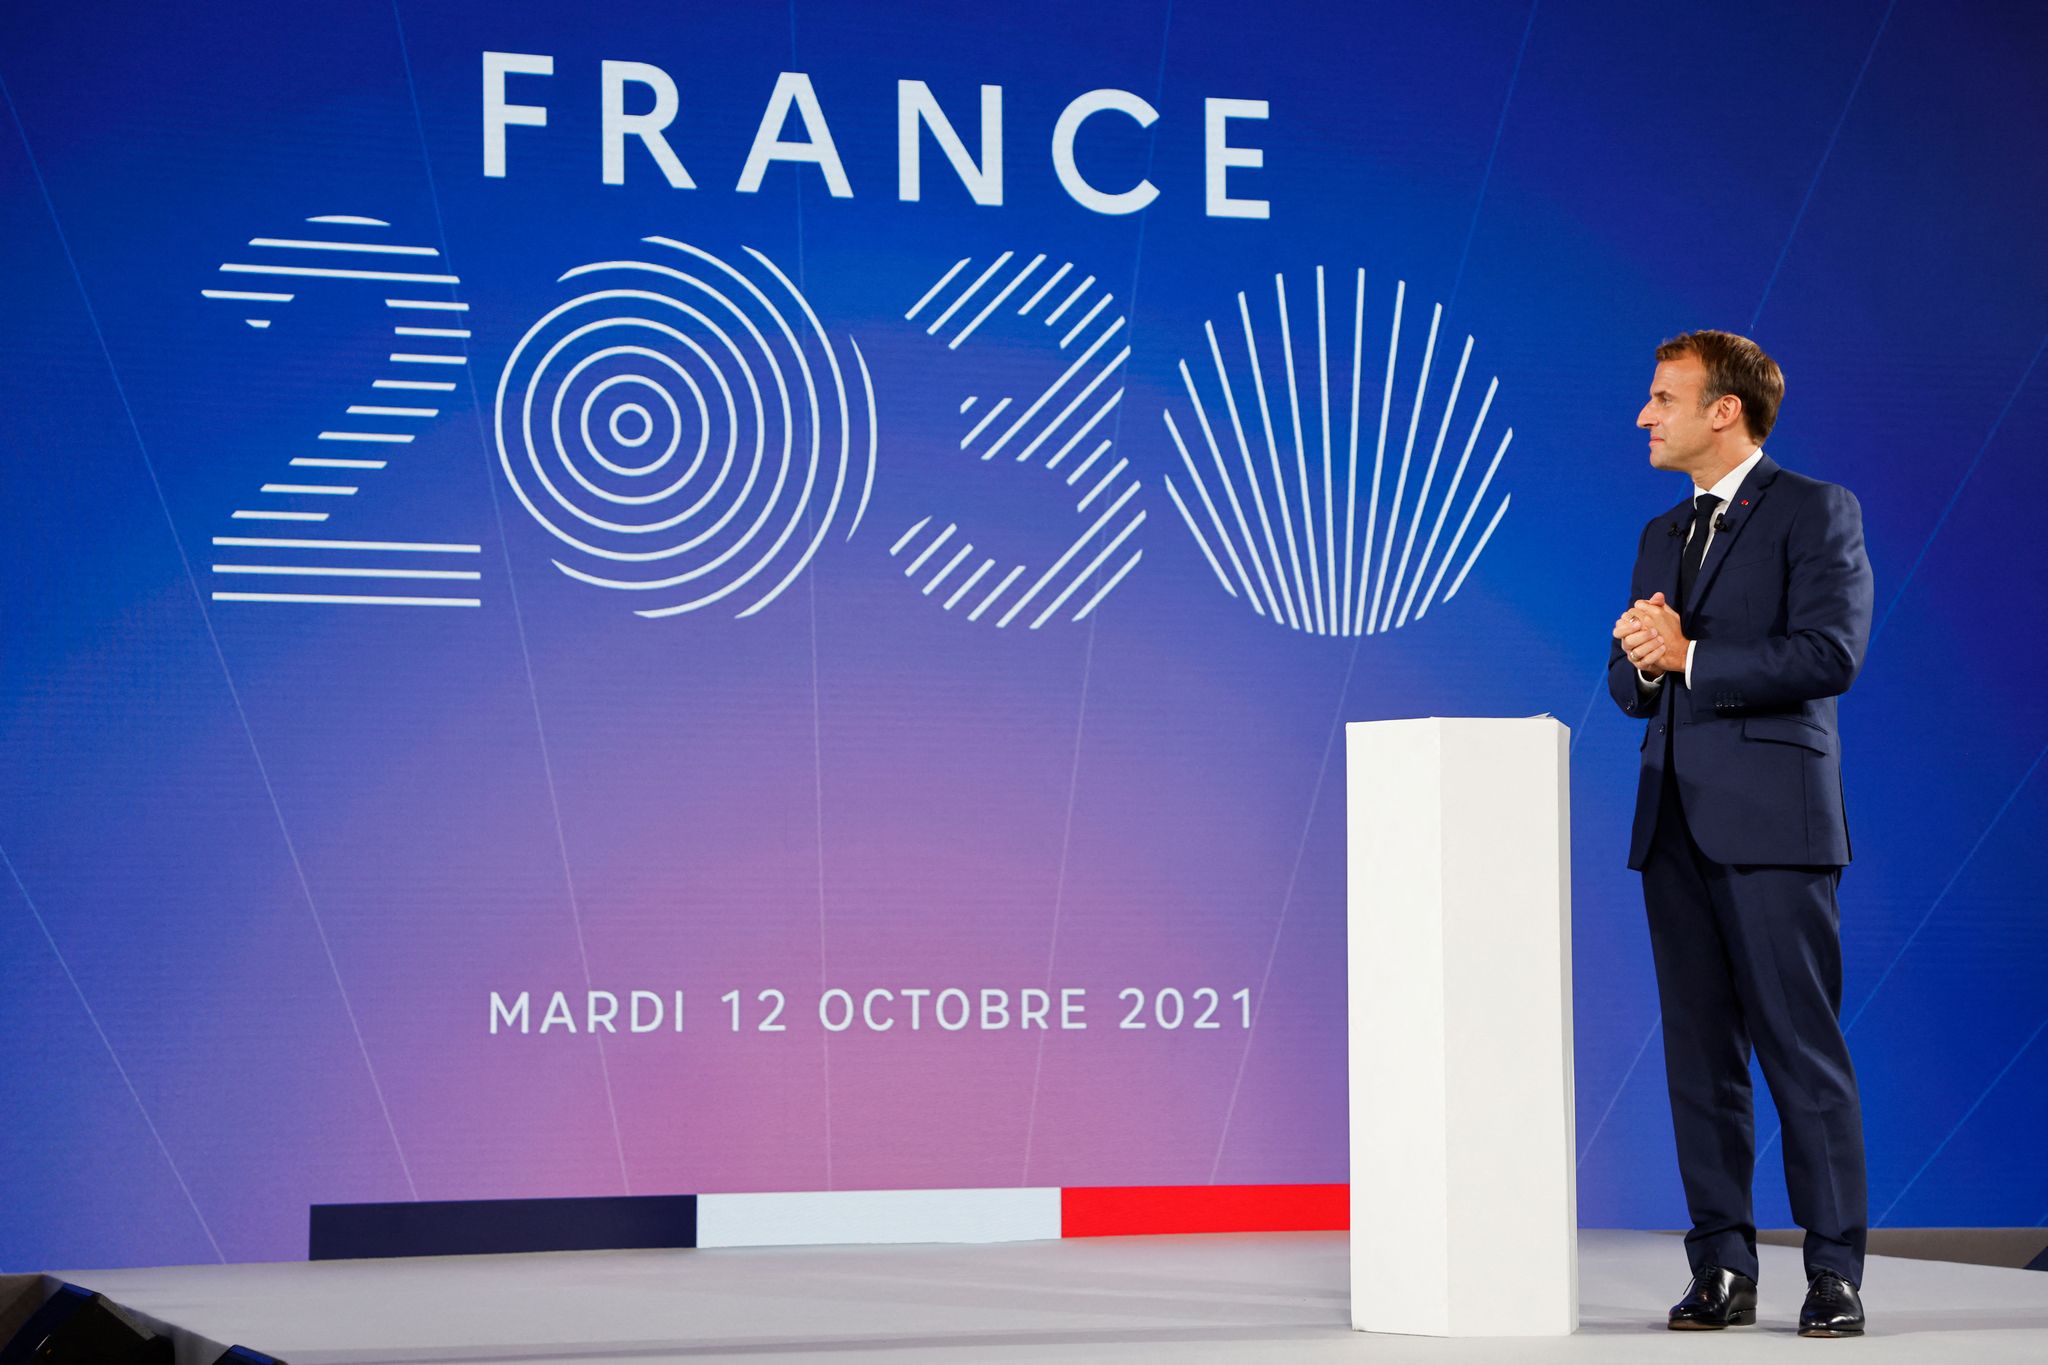 France's President Emmanuel Macron gestures as he speaks during the presentation of "France 2030" investment plan at The Elysee Presidential Palace in Paris, on October 12, 2021. - Hydrogen, semiconductors or electric batteries: Emmanuel Macron details on October 12, 2021, the priority sectors of the "France 2030" plan to "bring out the champions of tomorrow", in the face of Chinese and American competition and criticism of the "decline" of France. (Photo by Ludovic MARIN / POOL / AFP)